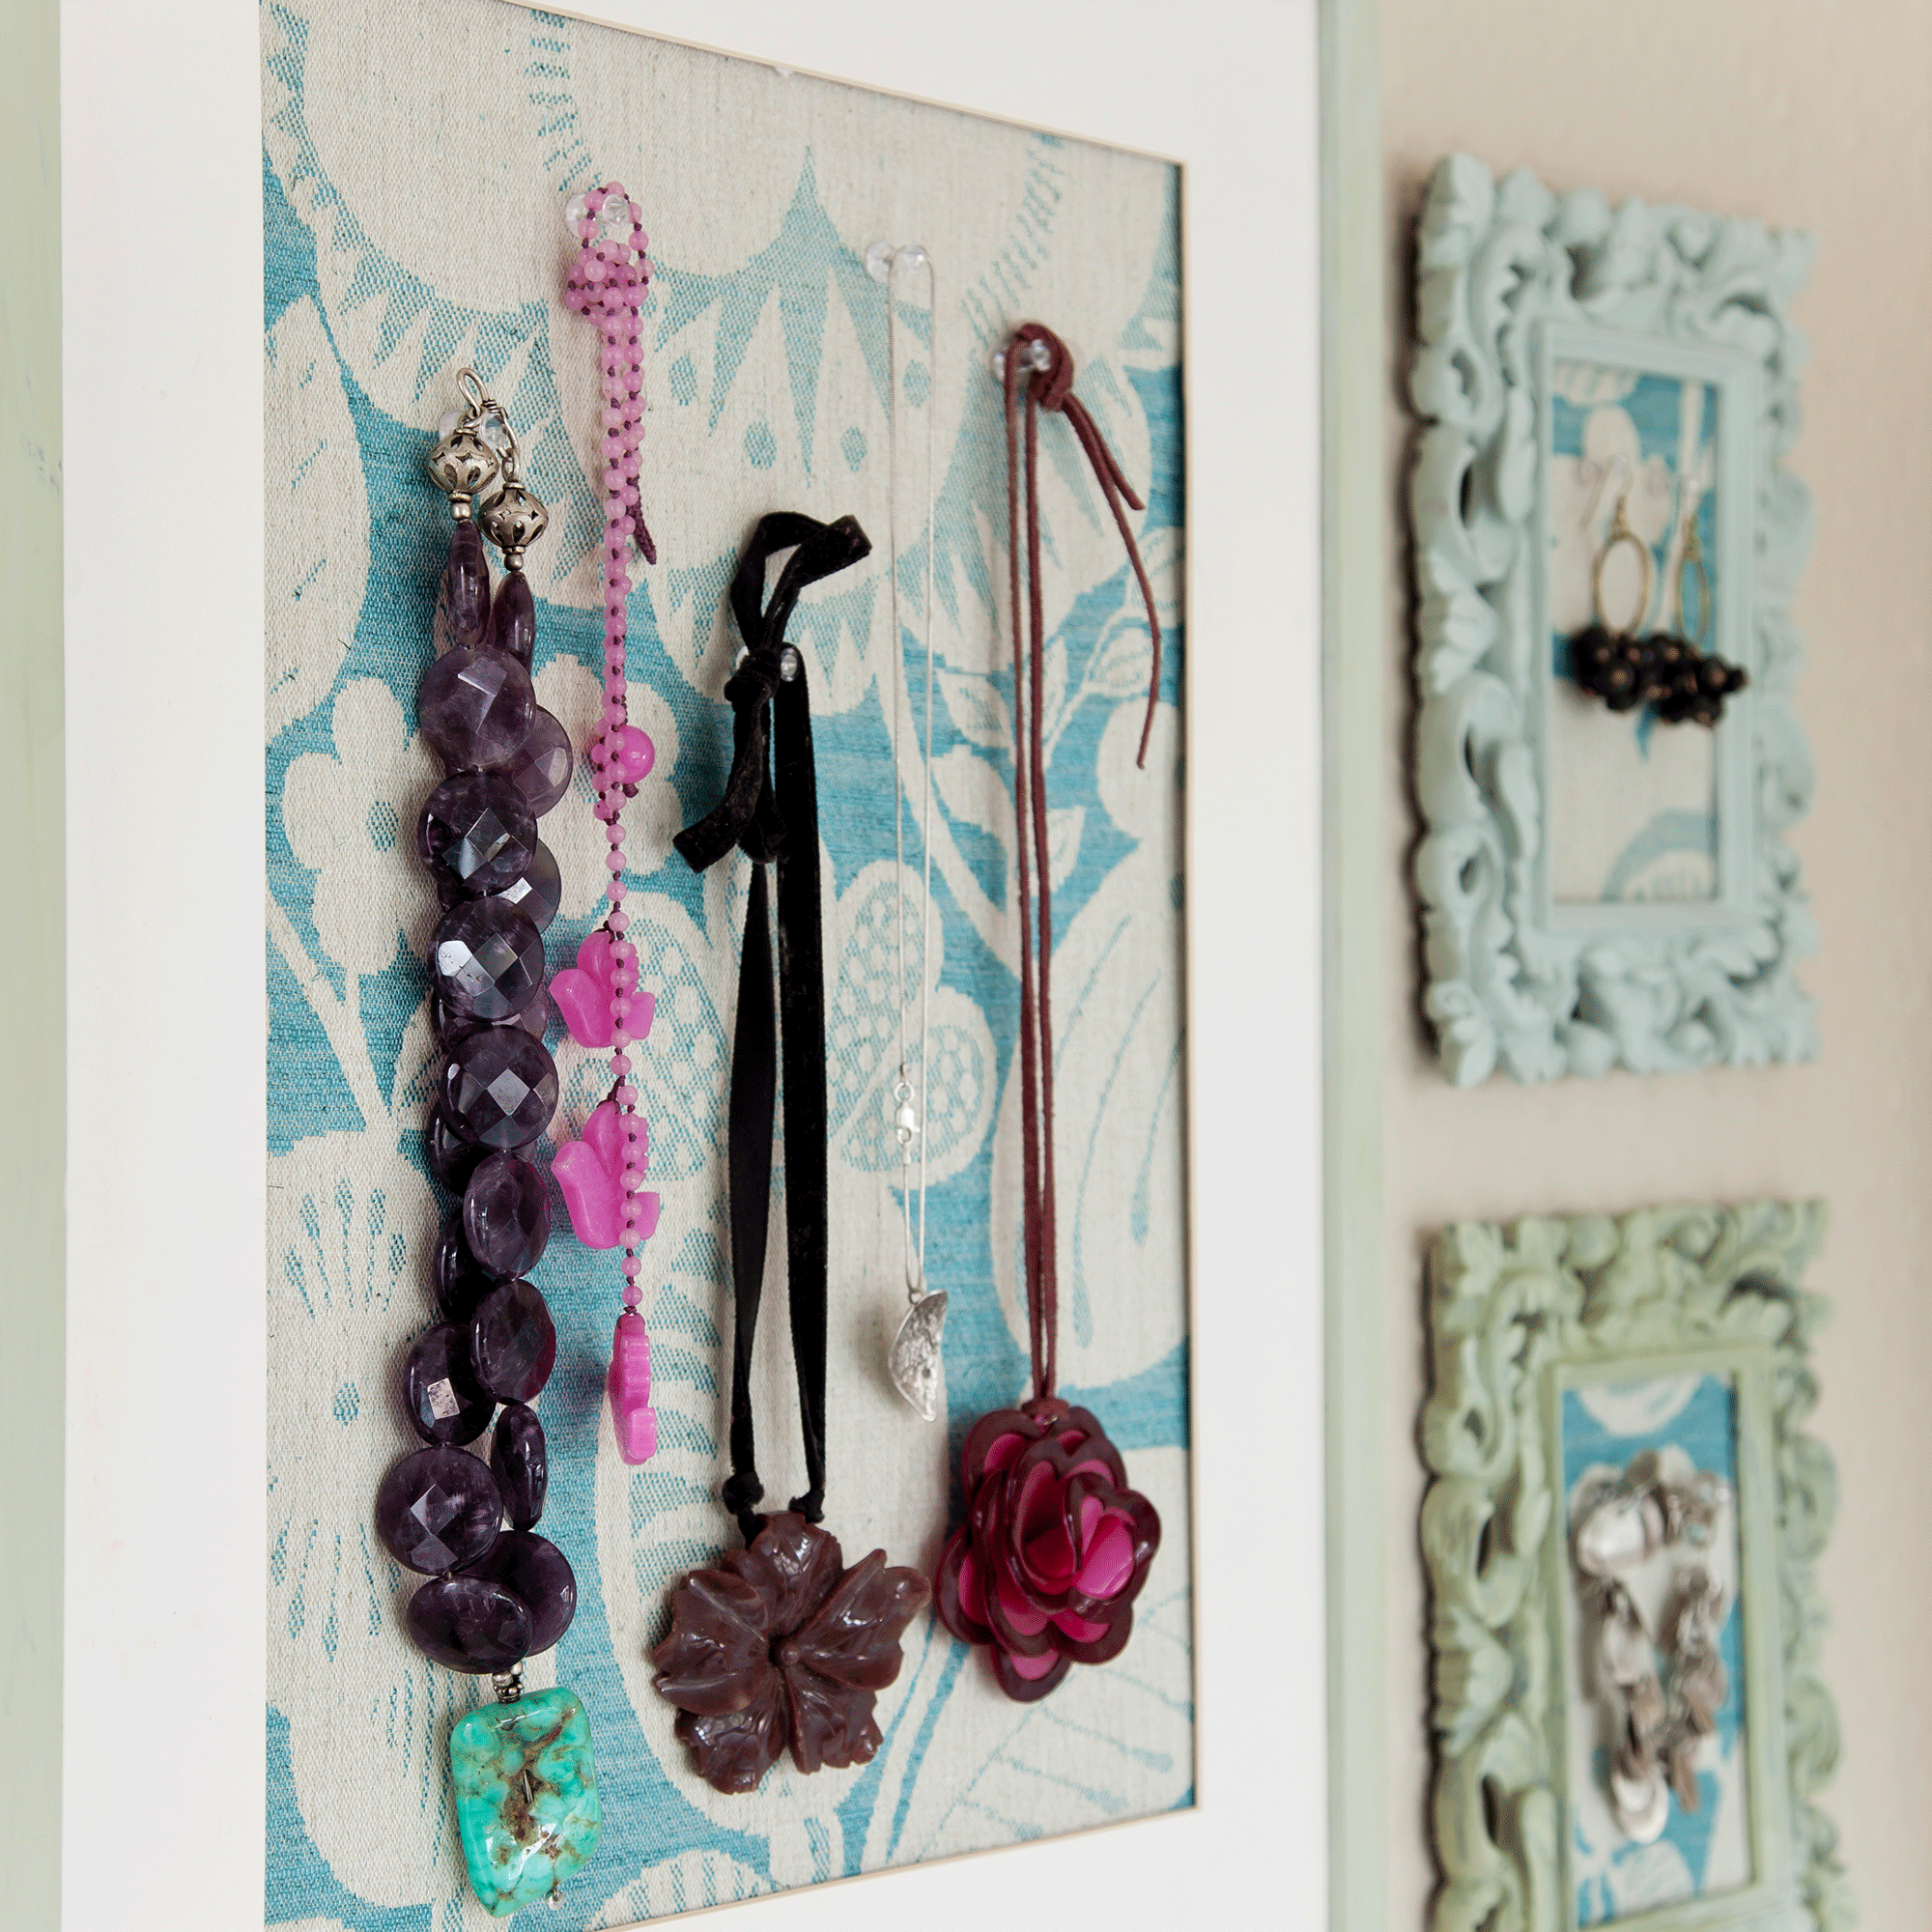 Necklaces hung in frames